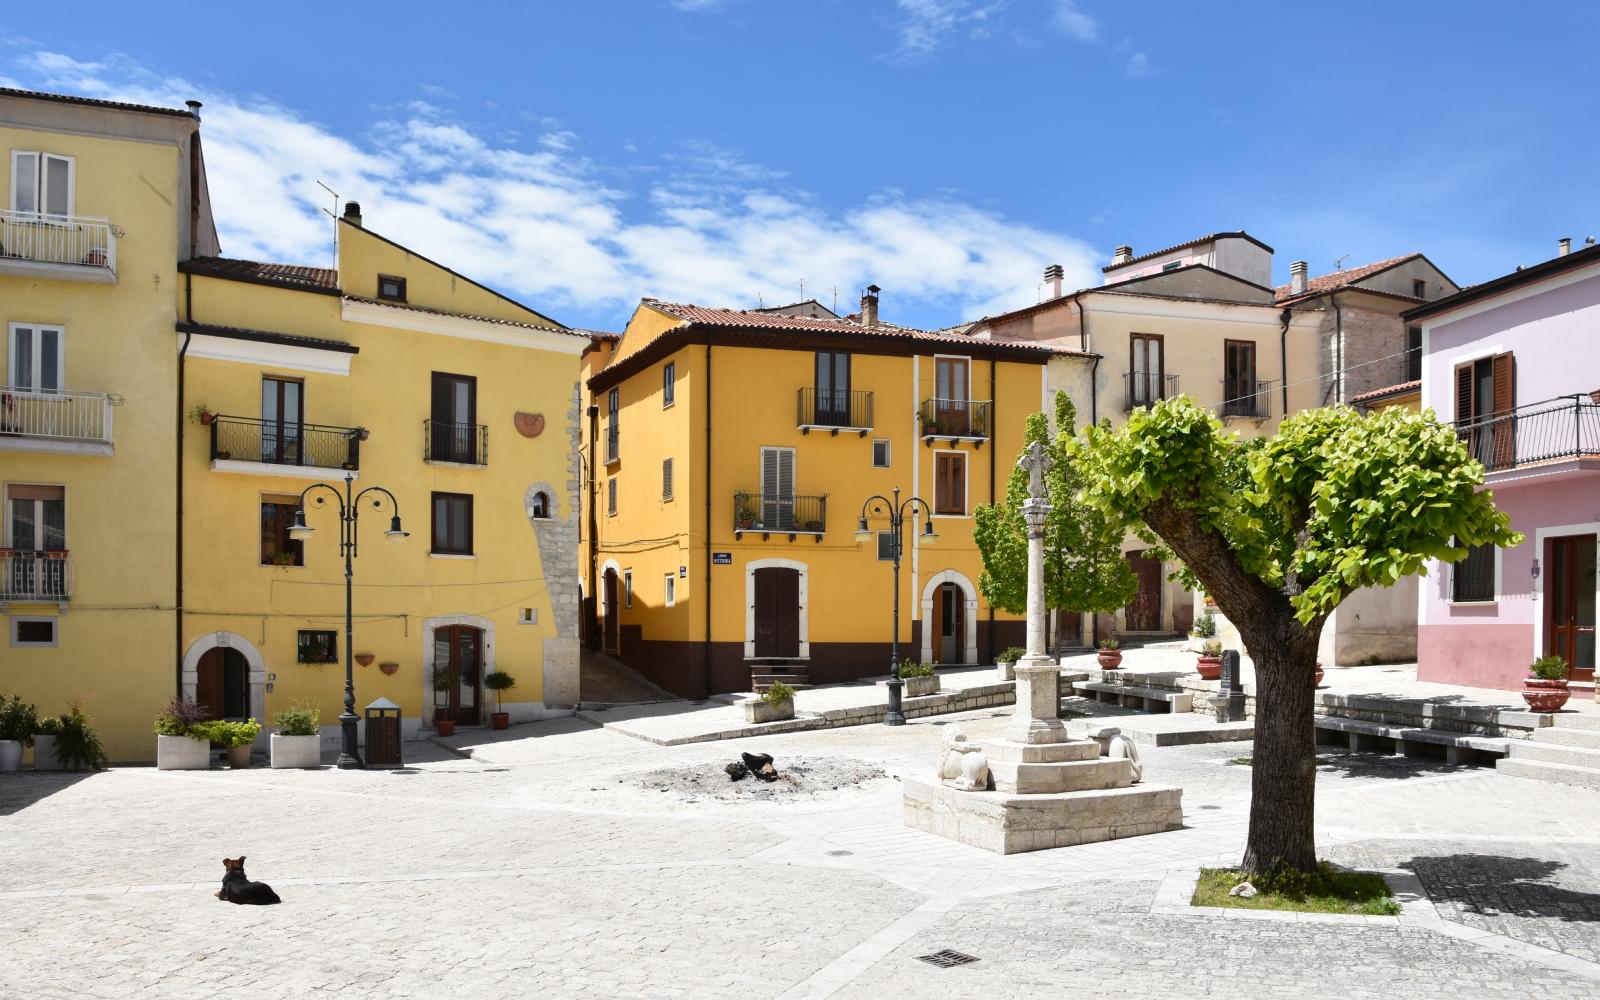 Scenic view of the historic town of Isernia in the region of Molise, Italy